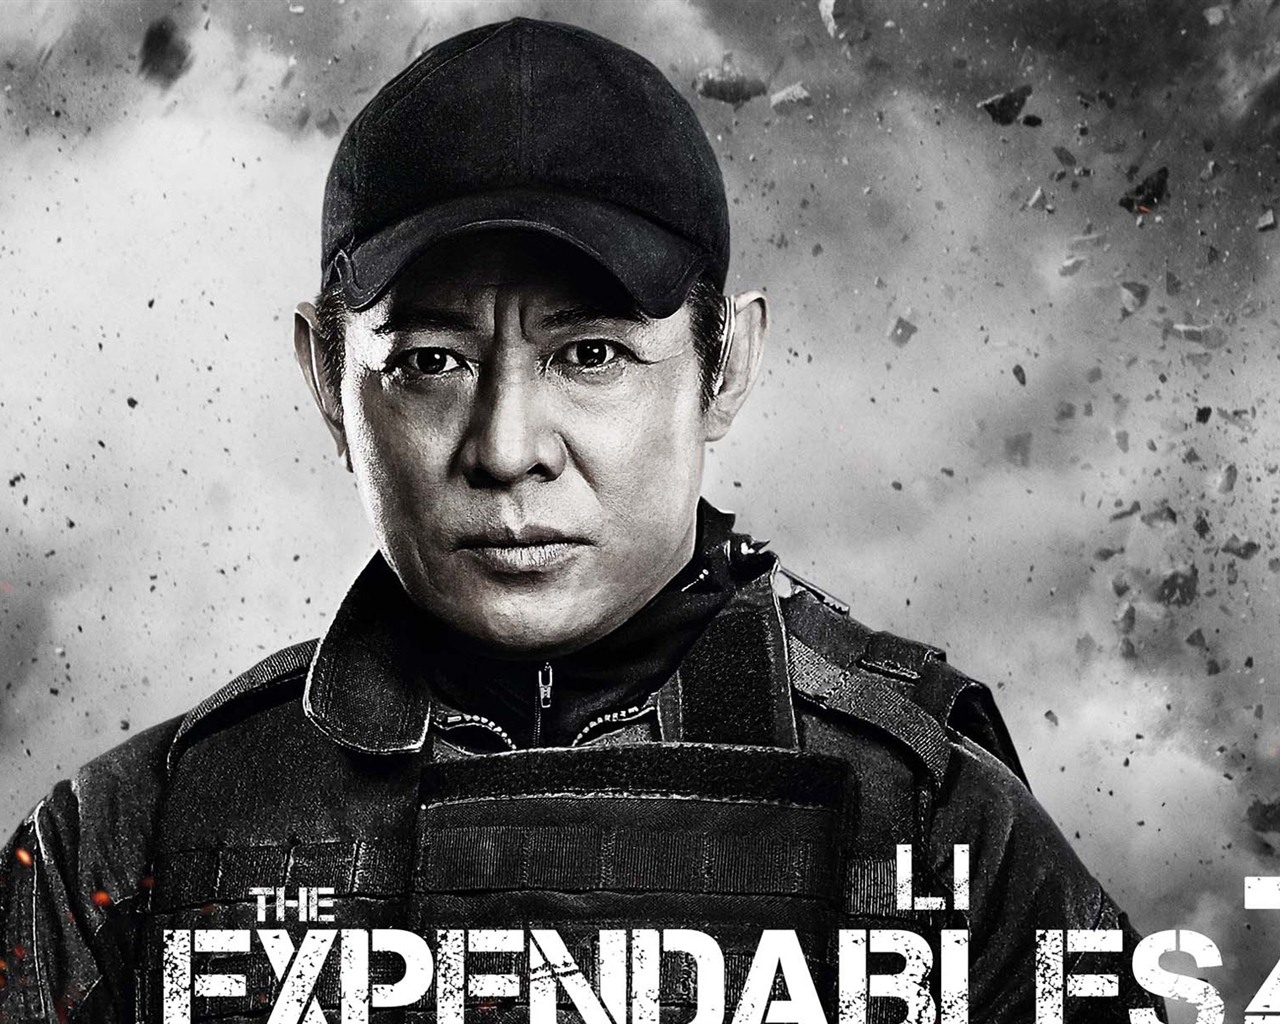 2012 Expendables2 HDの壁紙 #16 - 1280x1024